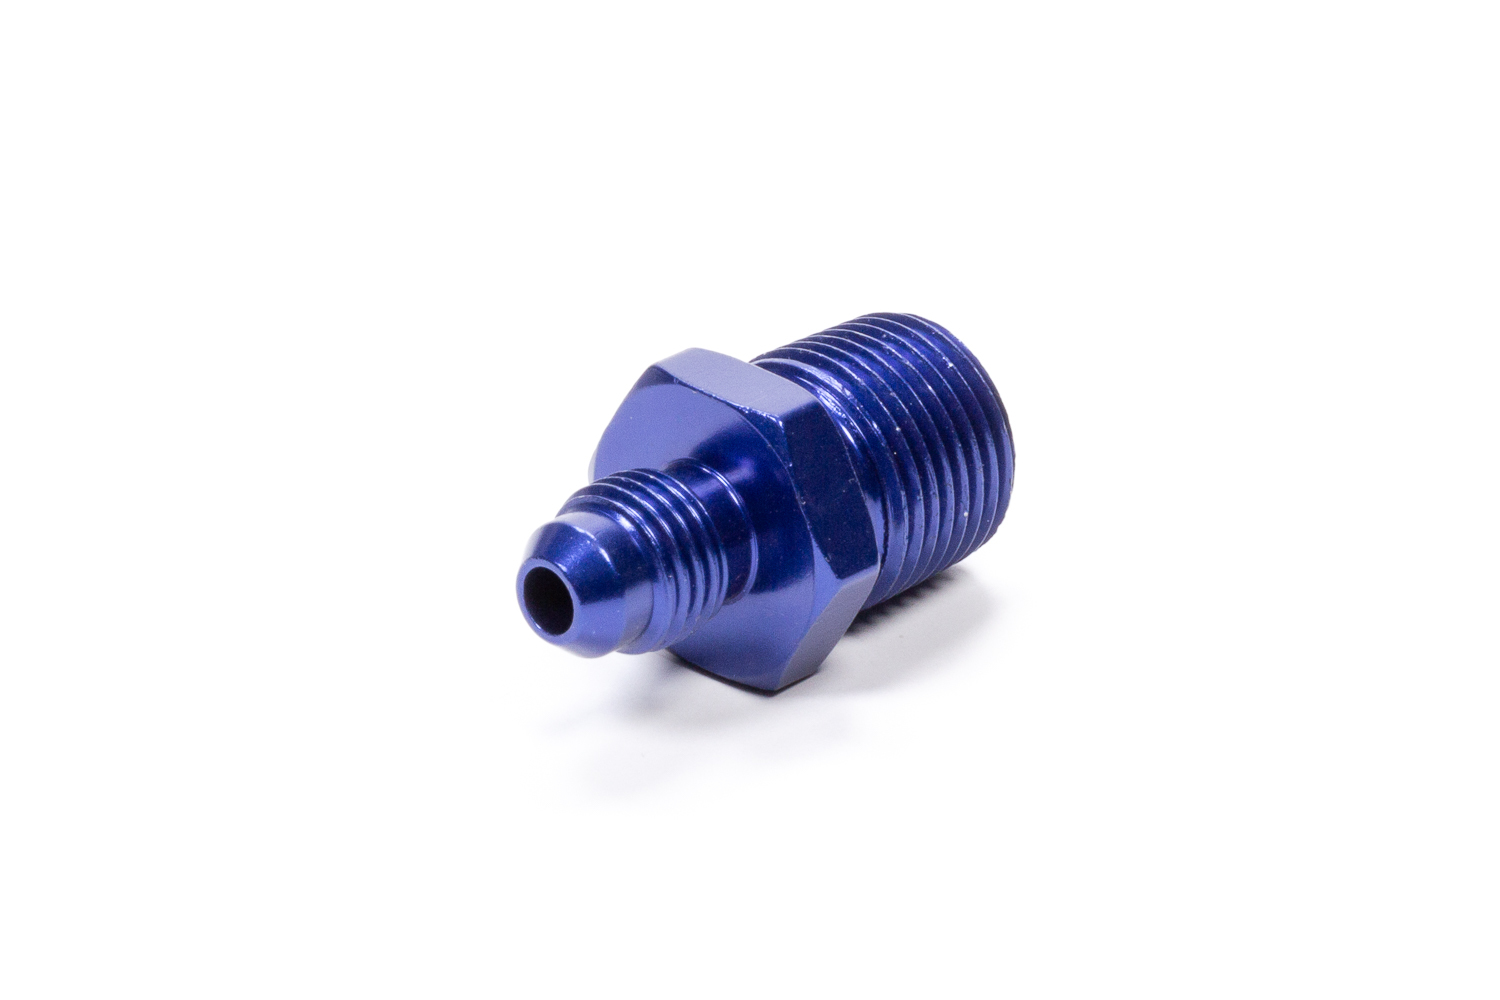 Fragola 481644 - Straight Adapter Fitting #4 x 3/8 MPT